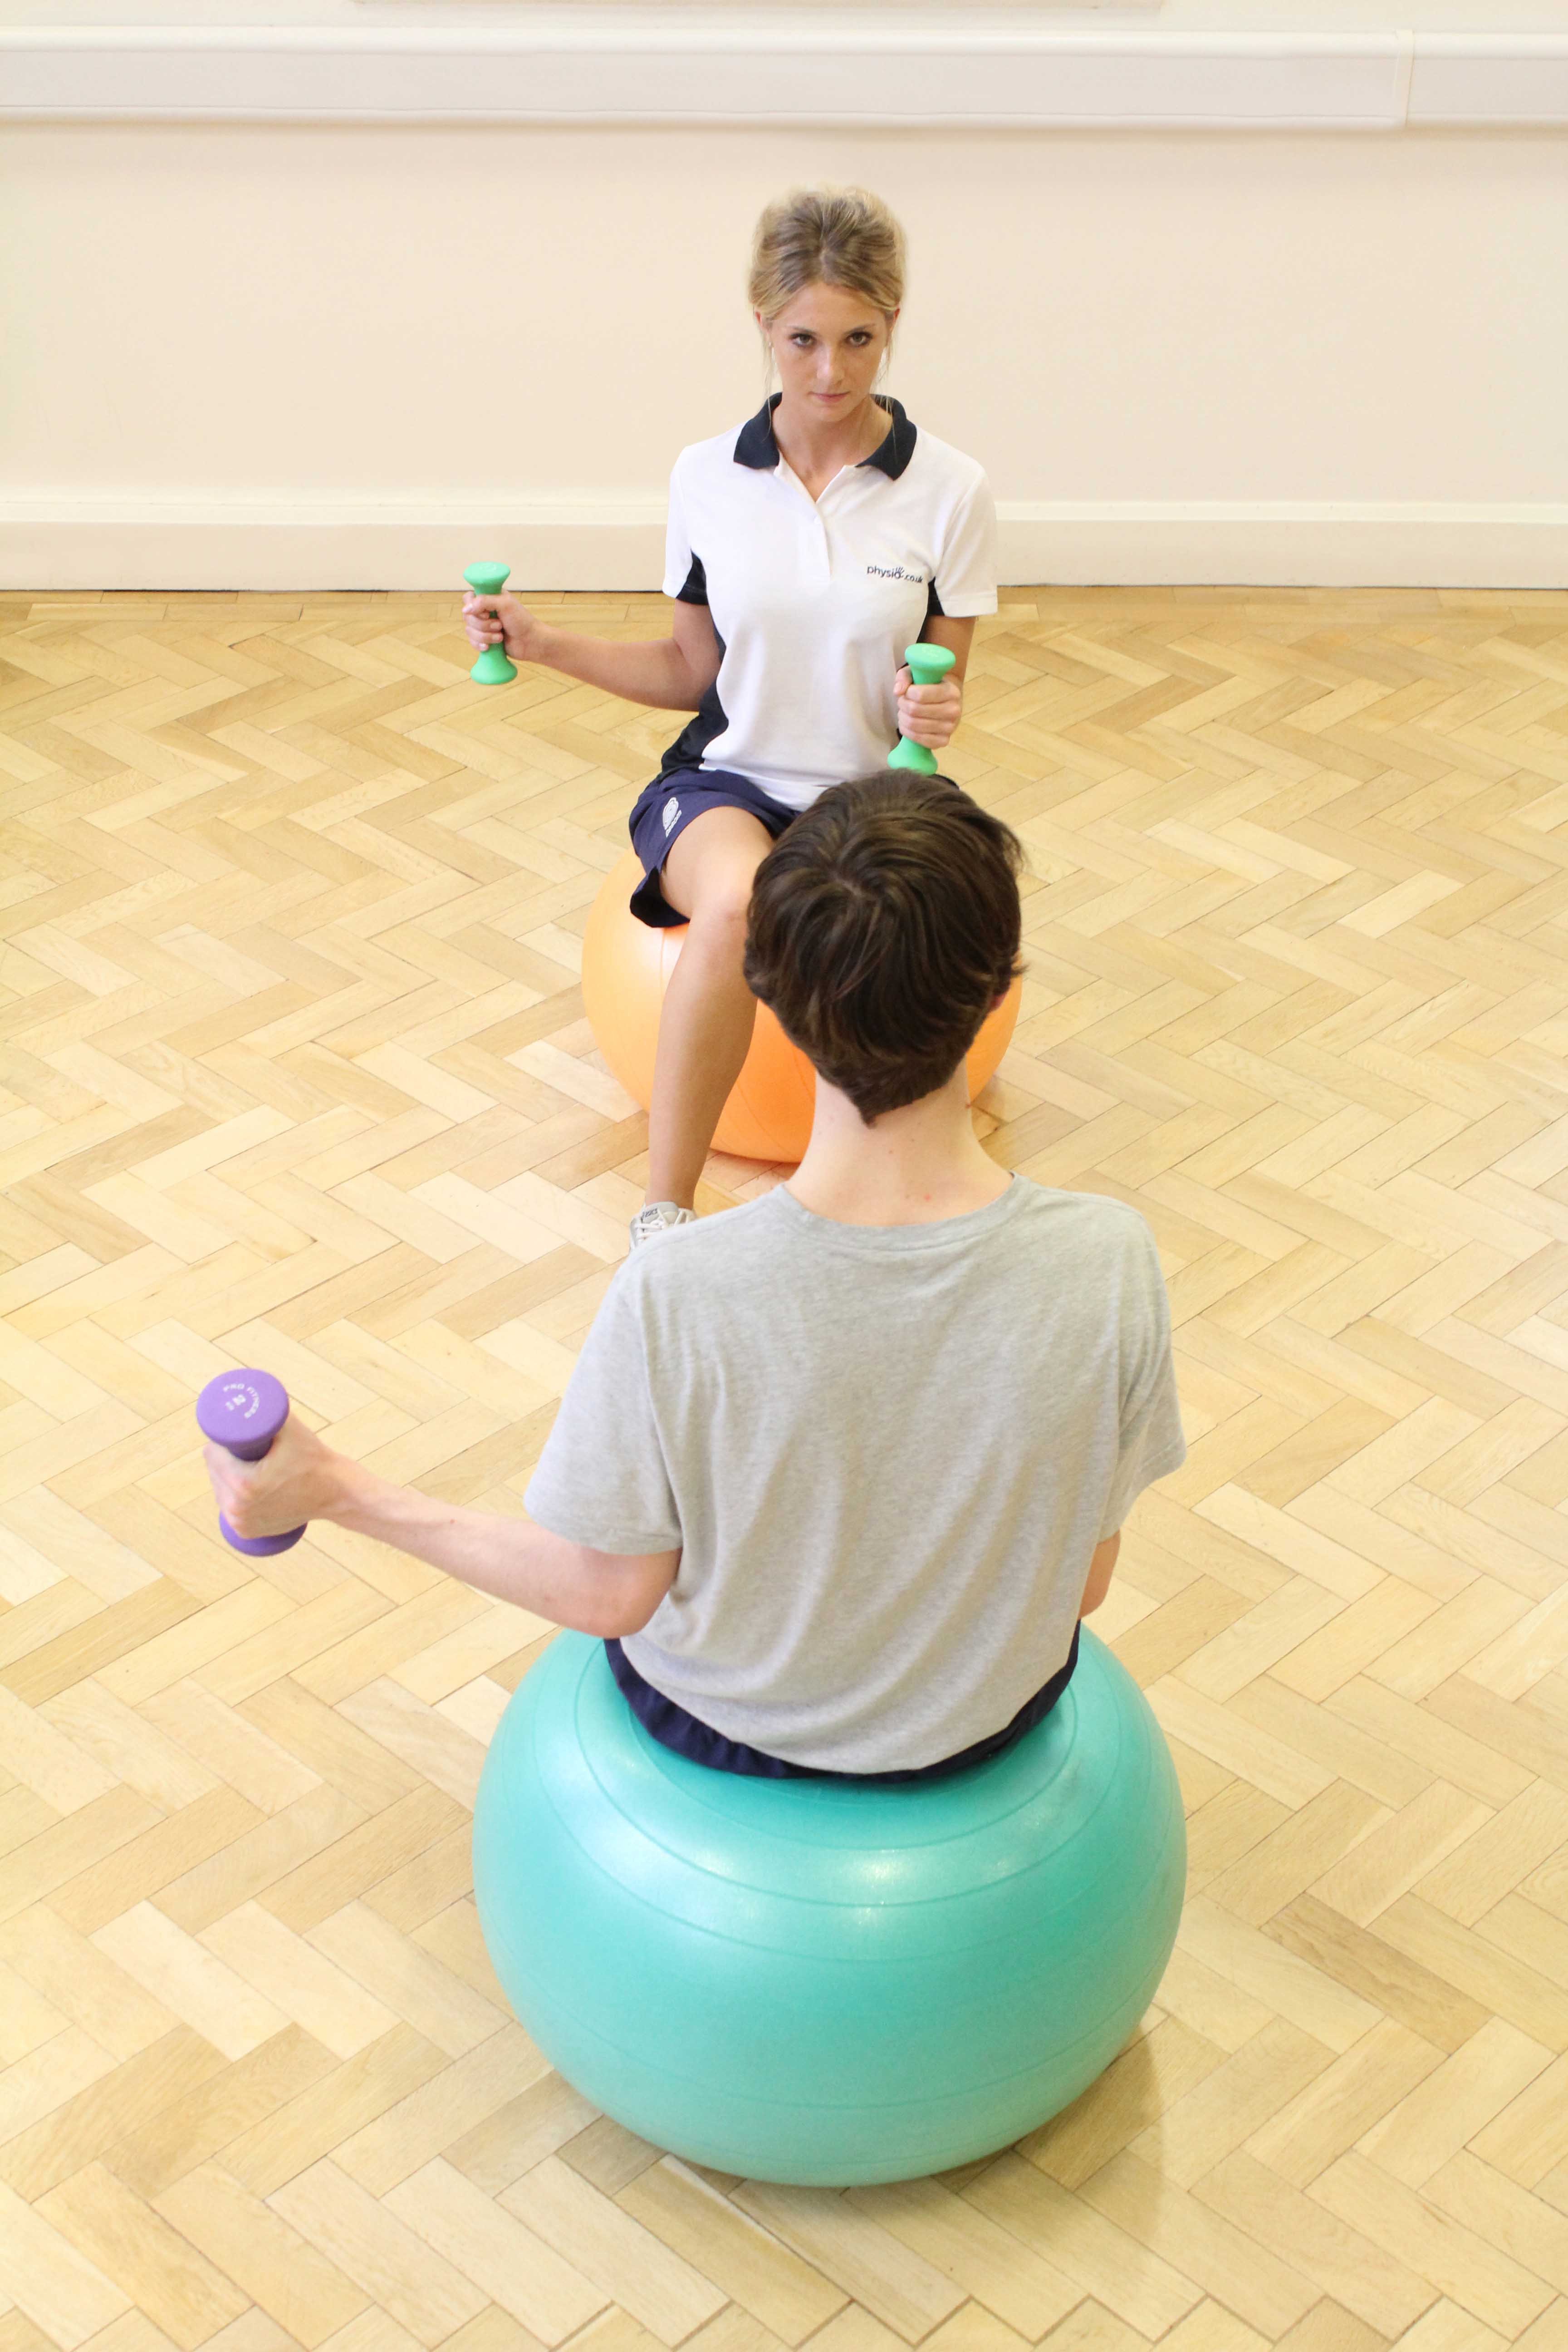 Functional wrist exercises assisted by experienced MSK Physiotherapist